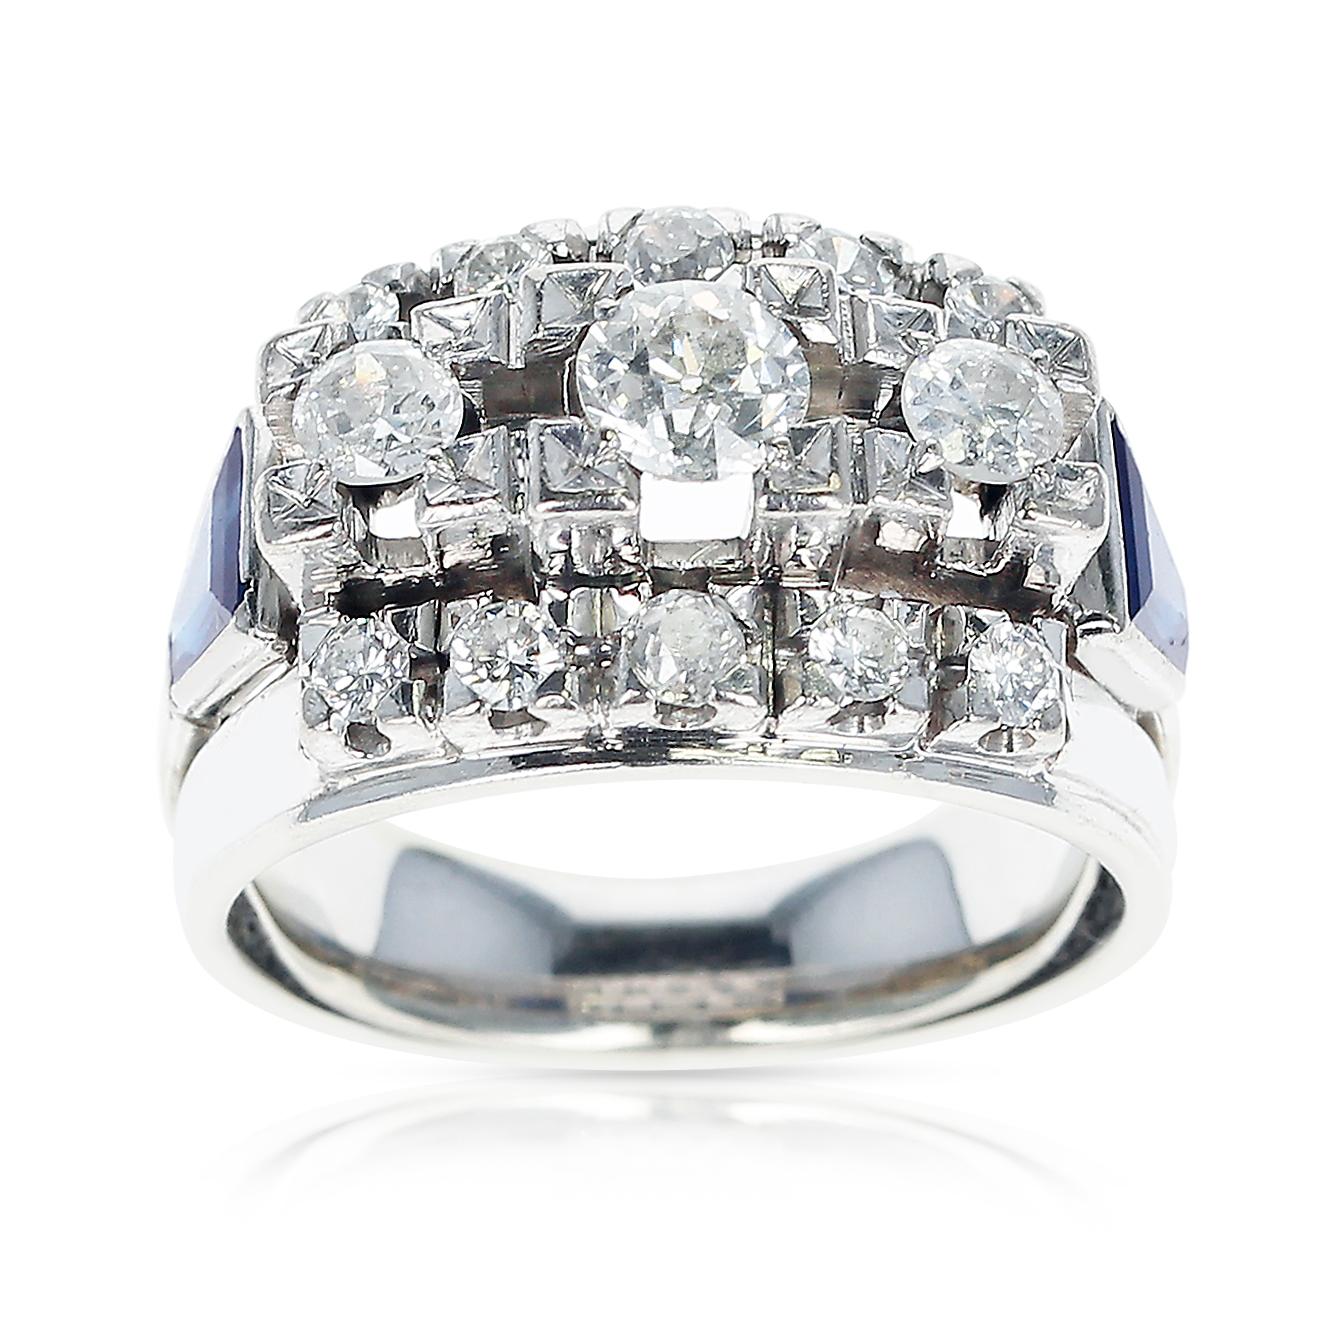 A 1950s Bold and Prominent Diamond Ring with Thirteen Round Diamonds accented with Two Sapphire Trapezoids made in 18 Karat White Gold. Ring Size US 7.75. Total Weight: 11.63 grams. 
The three round diamonds are 0.85 carats total, and the accenting